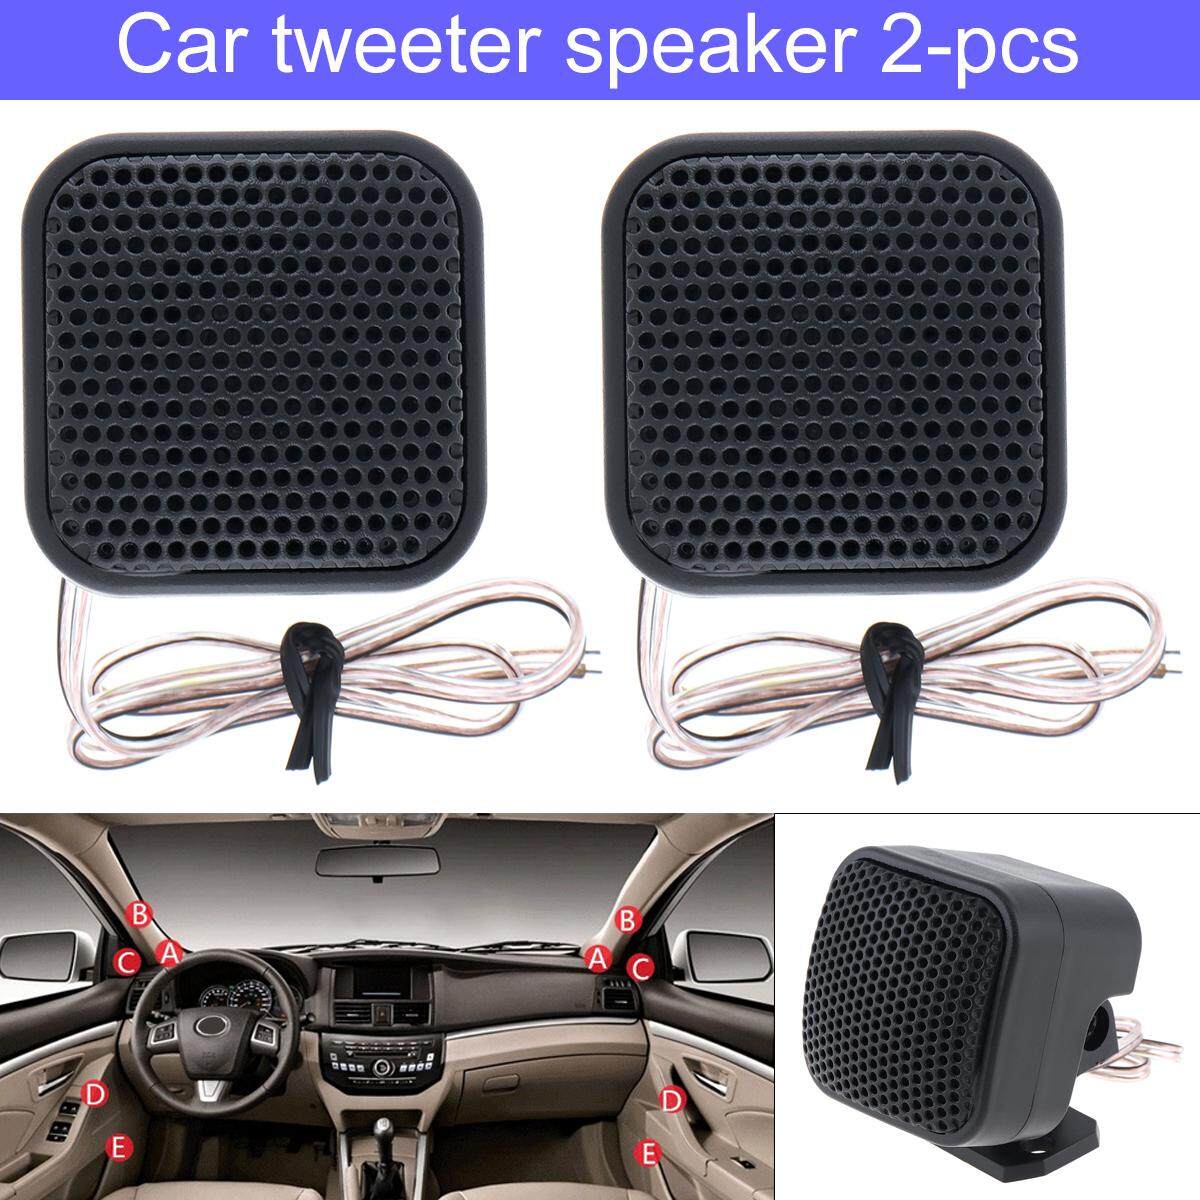 ePathChina 2pcs 140W T280 High Efficiency Mini Dome Tweeter Speakers for Car Audio System 